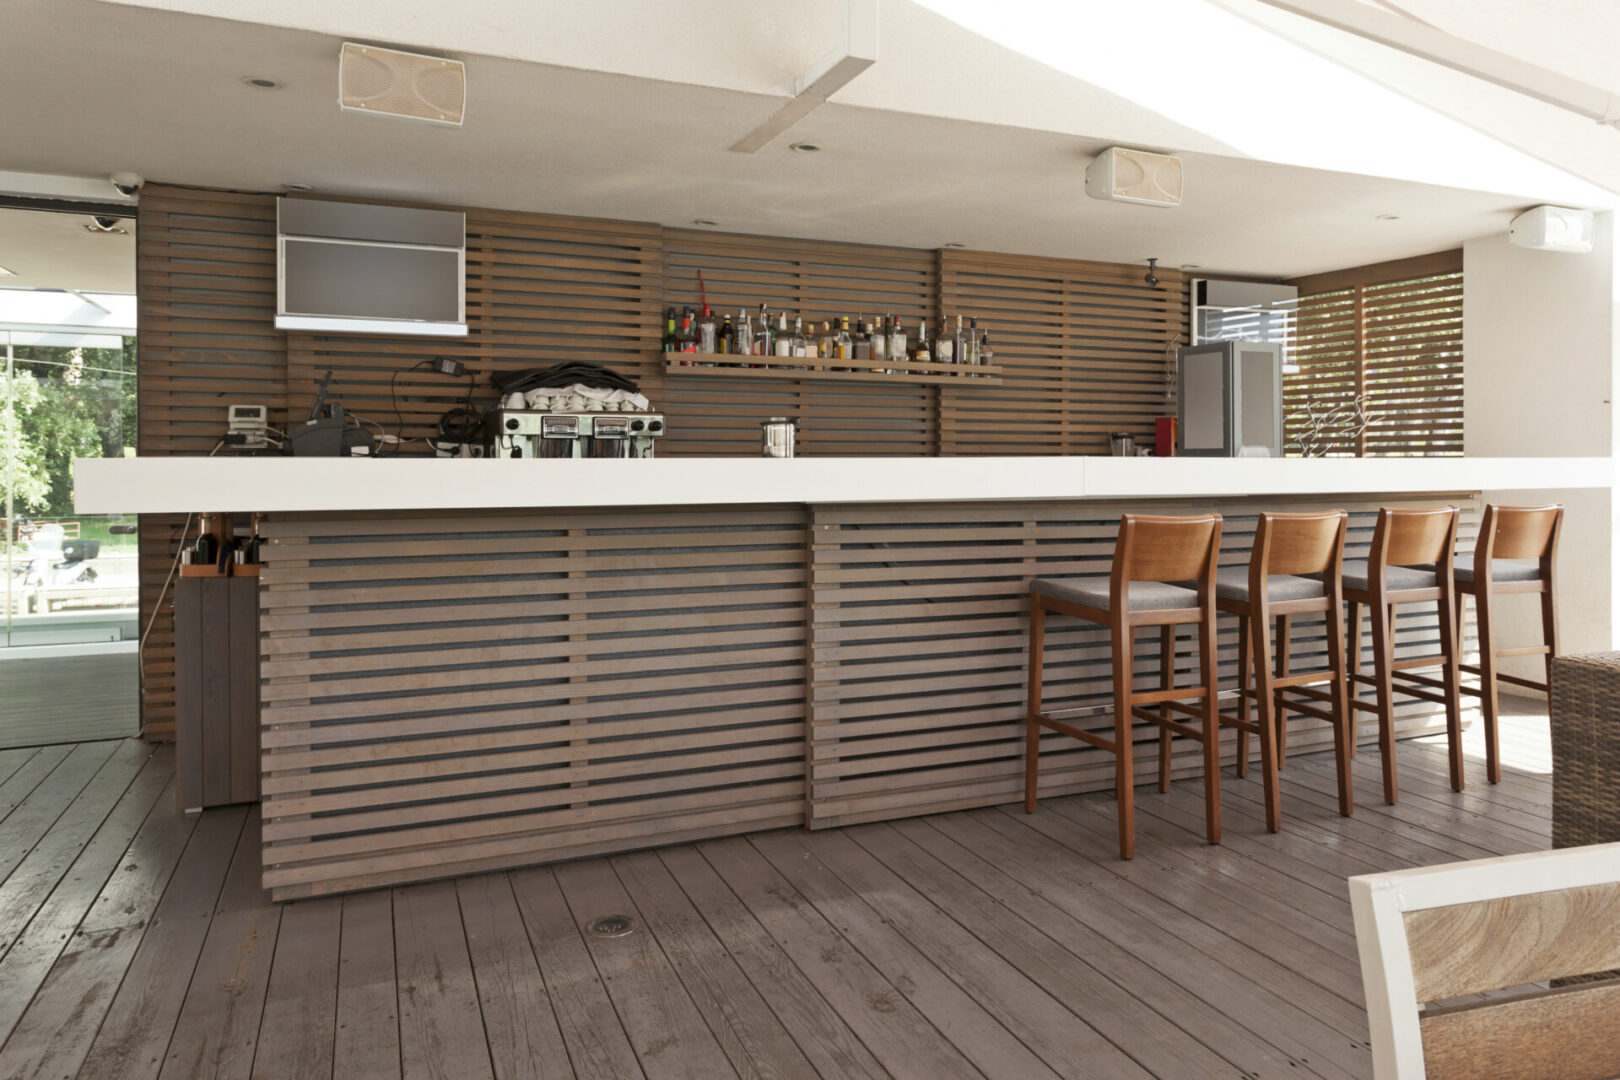 A bar with wooden chairs and a counter.